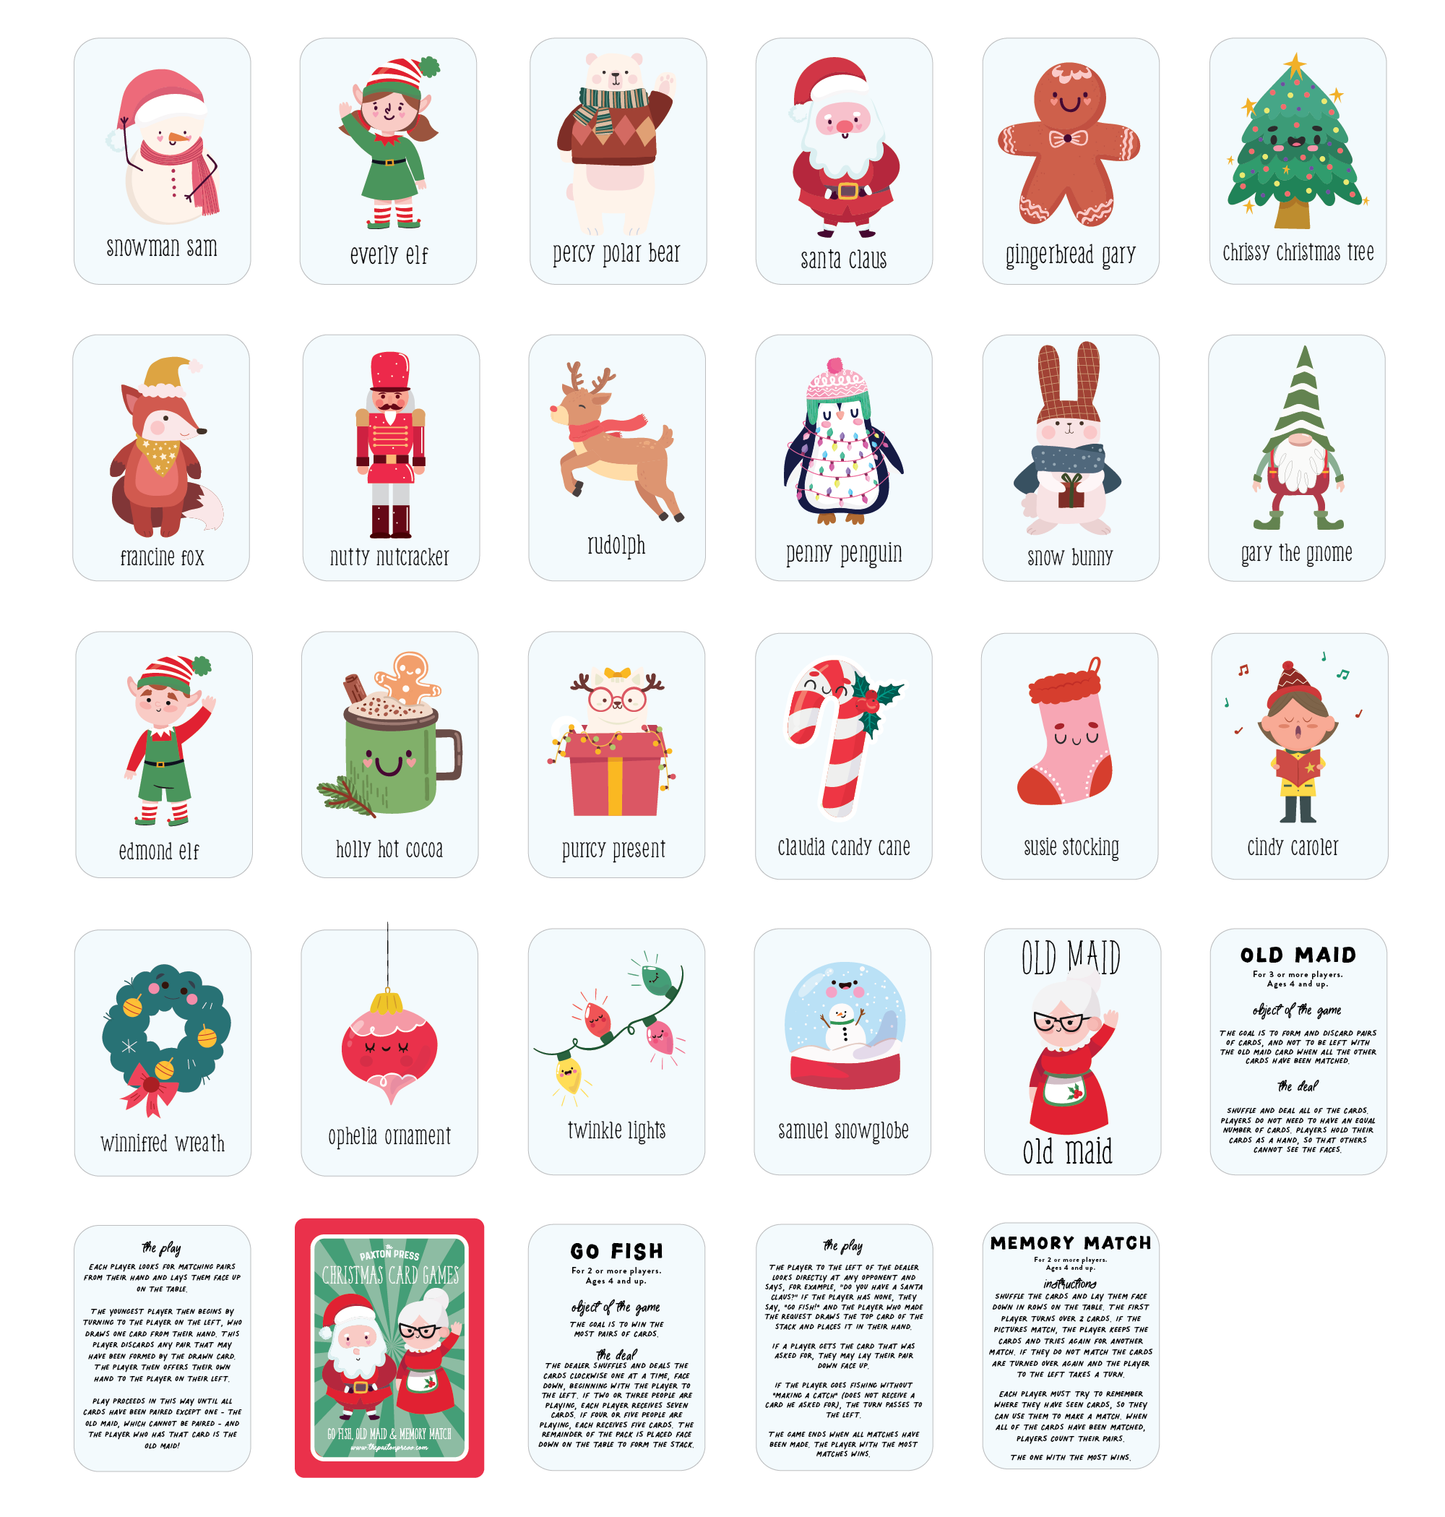 Christmas Jumbo Playing Card Deck (3 games in 1!)